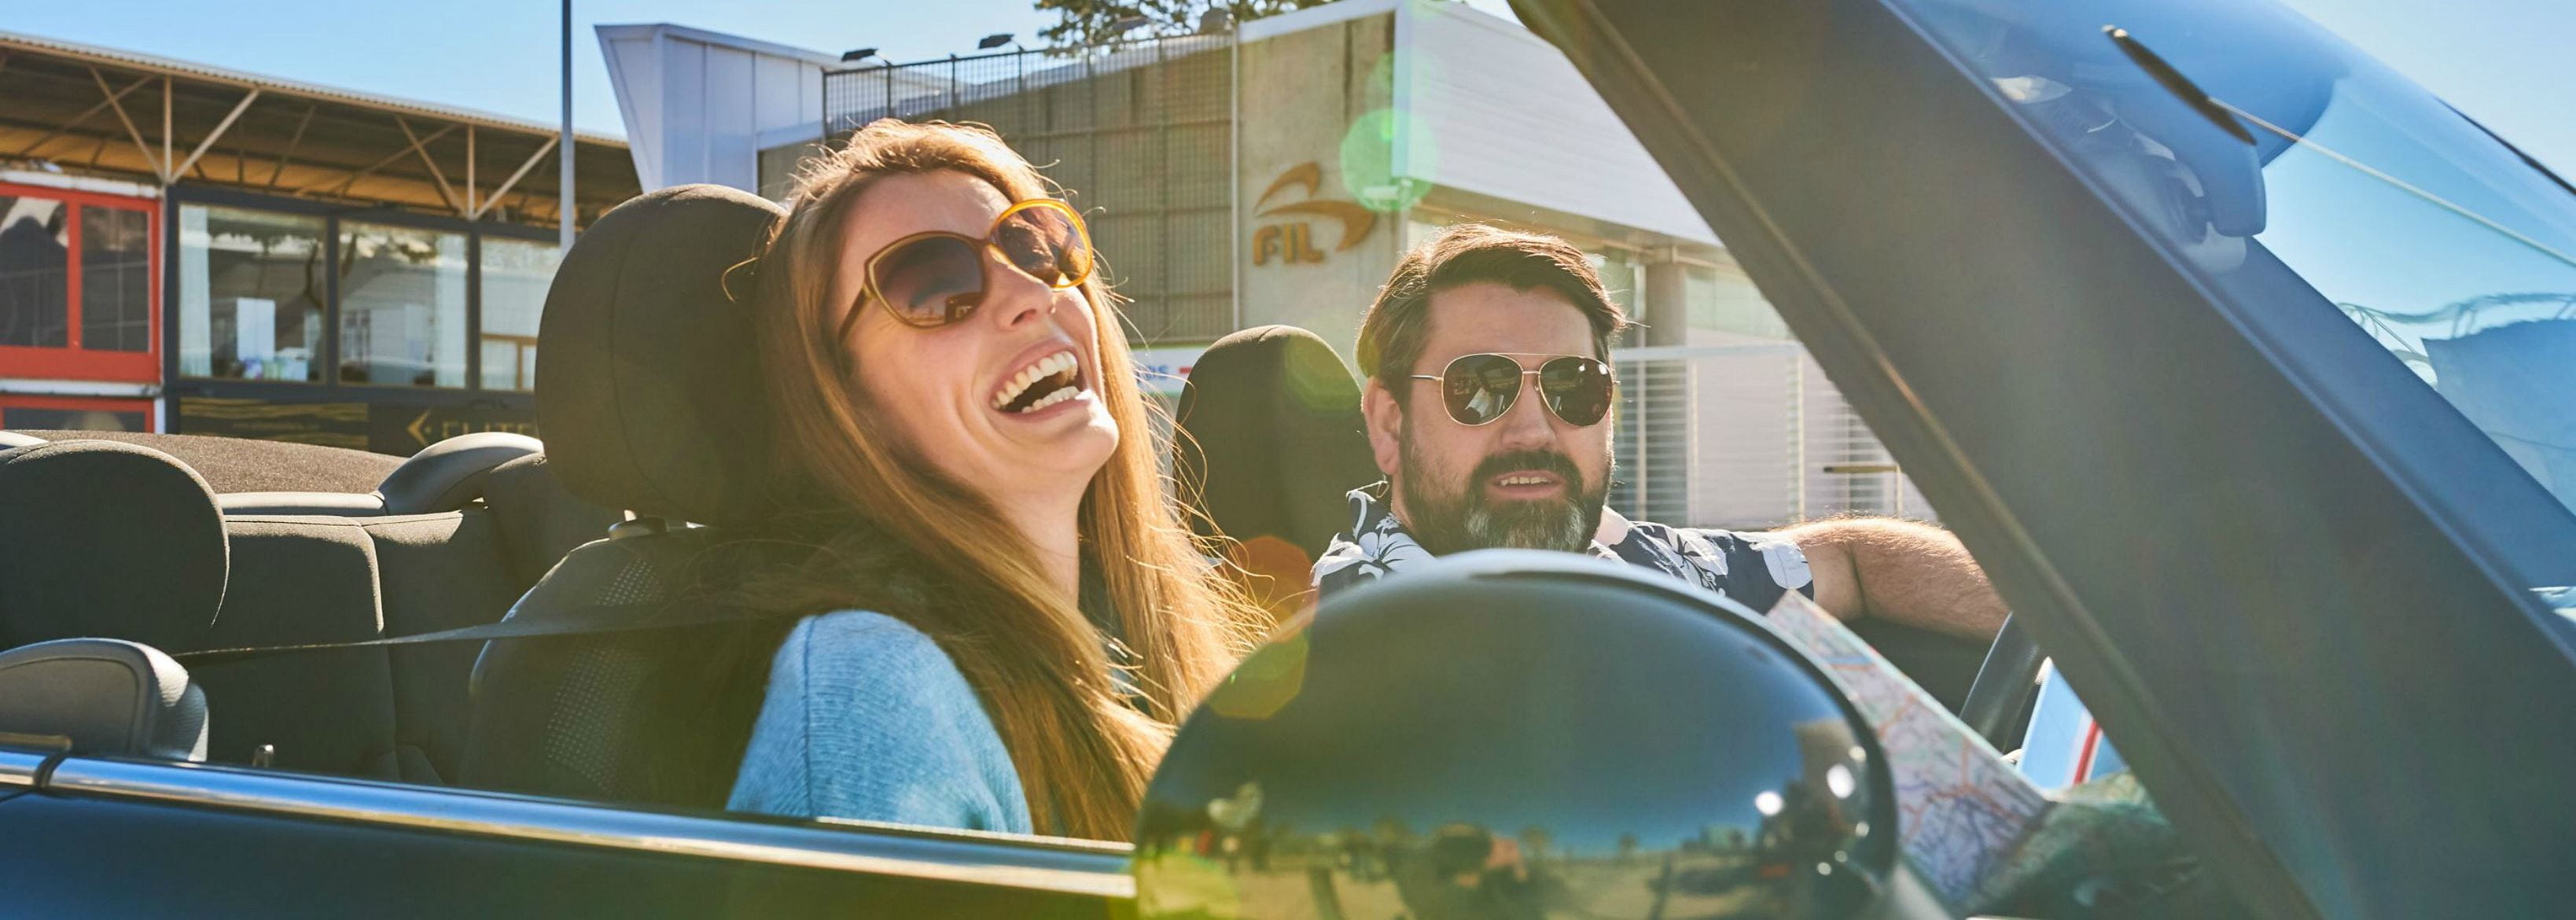 Happy woman and man in a car